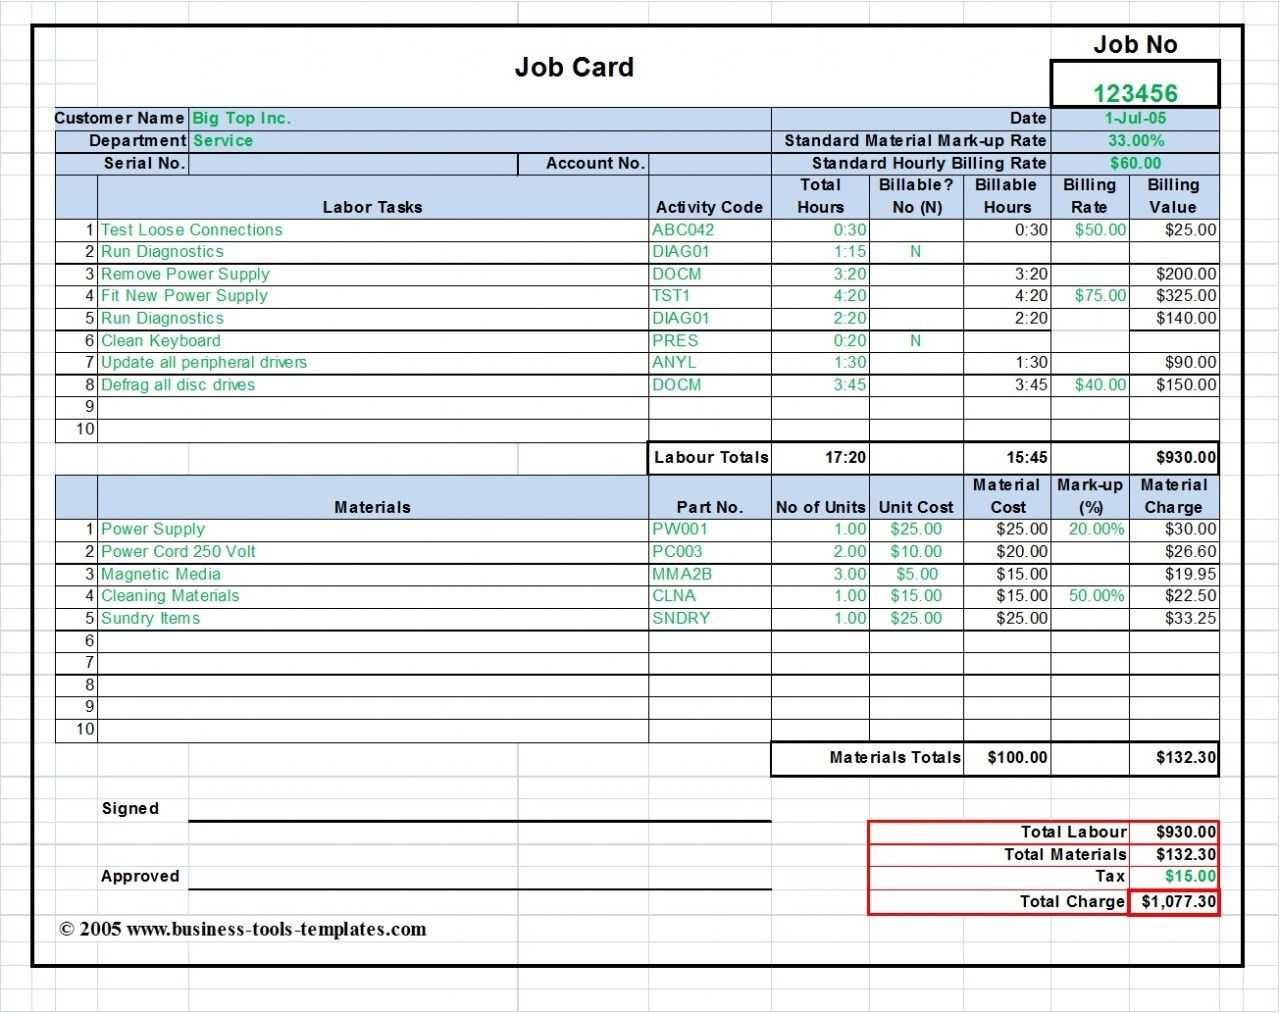 Workshop Job Card Template Excel, Labor & Material Cost In Job Cost Report Template Excel